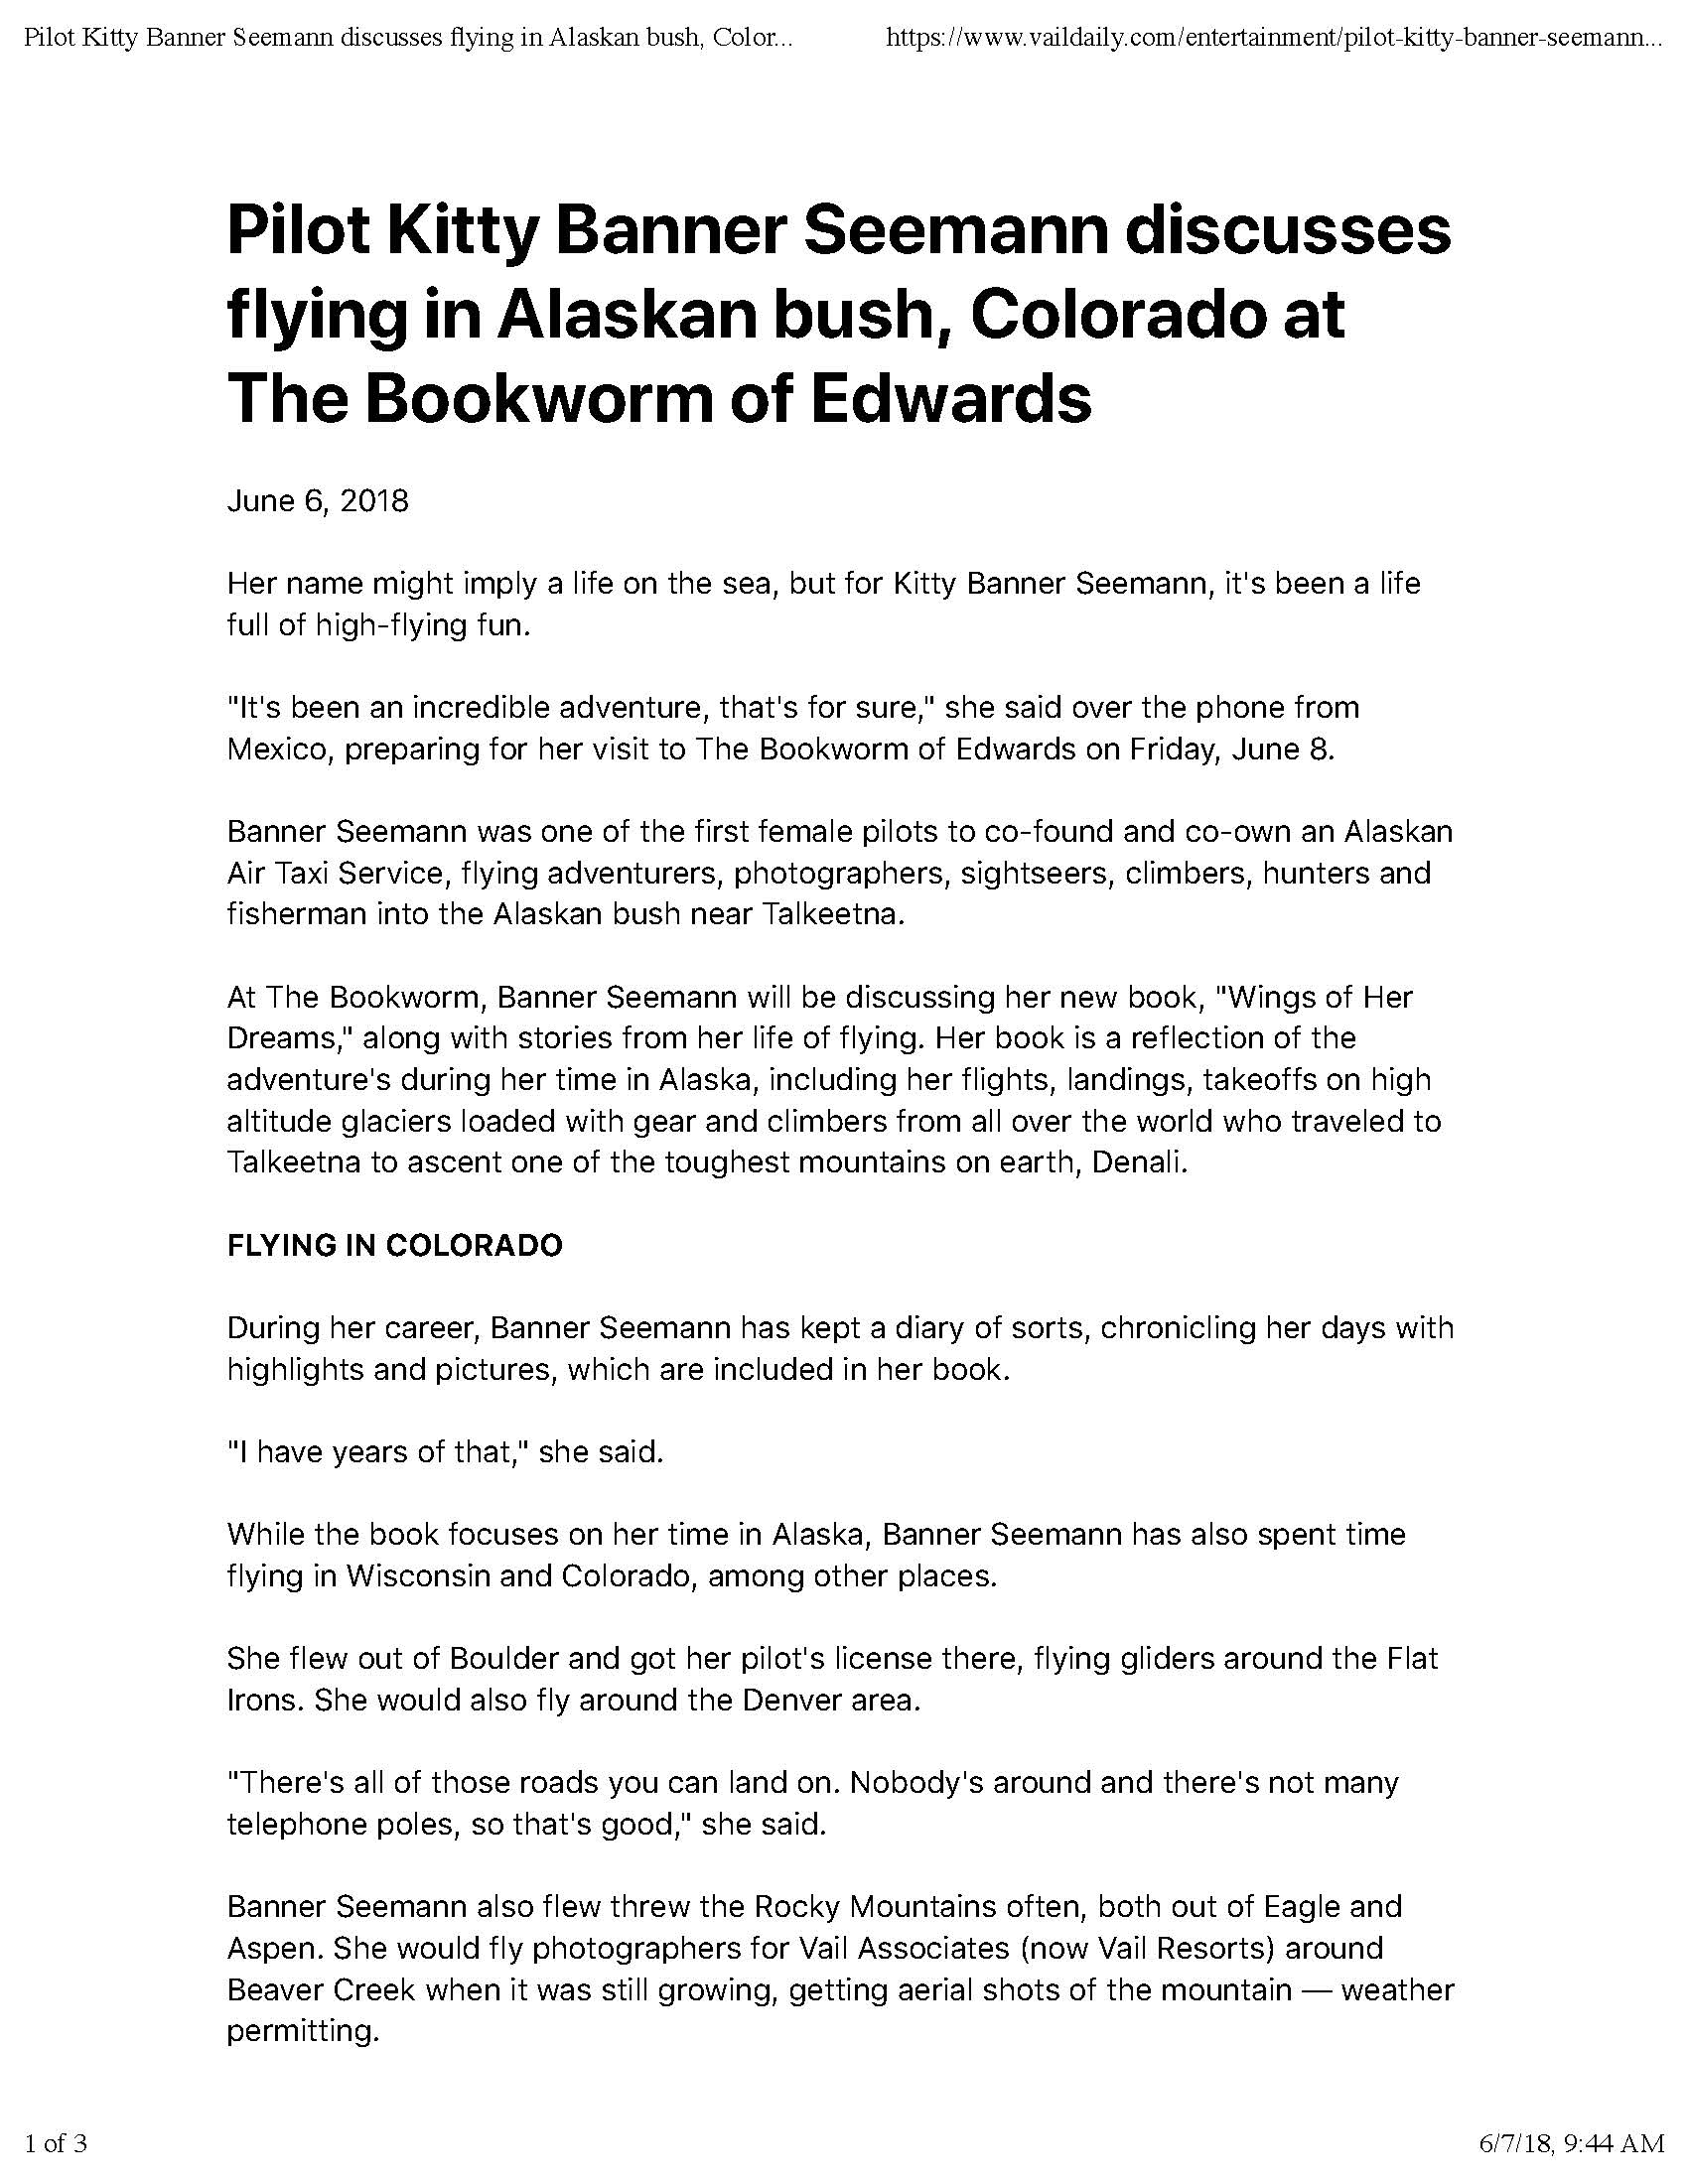 Pilot Kitty Banner Seemann discusses flying in Alaskan bush, Colorado at The Bookworm of Edwards | VailDaily.com_Page_1.jpg